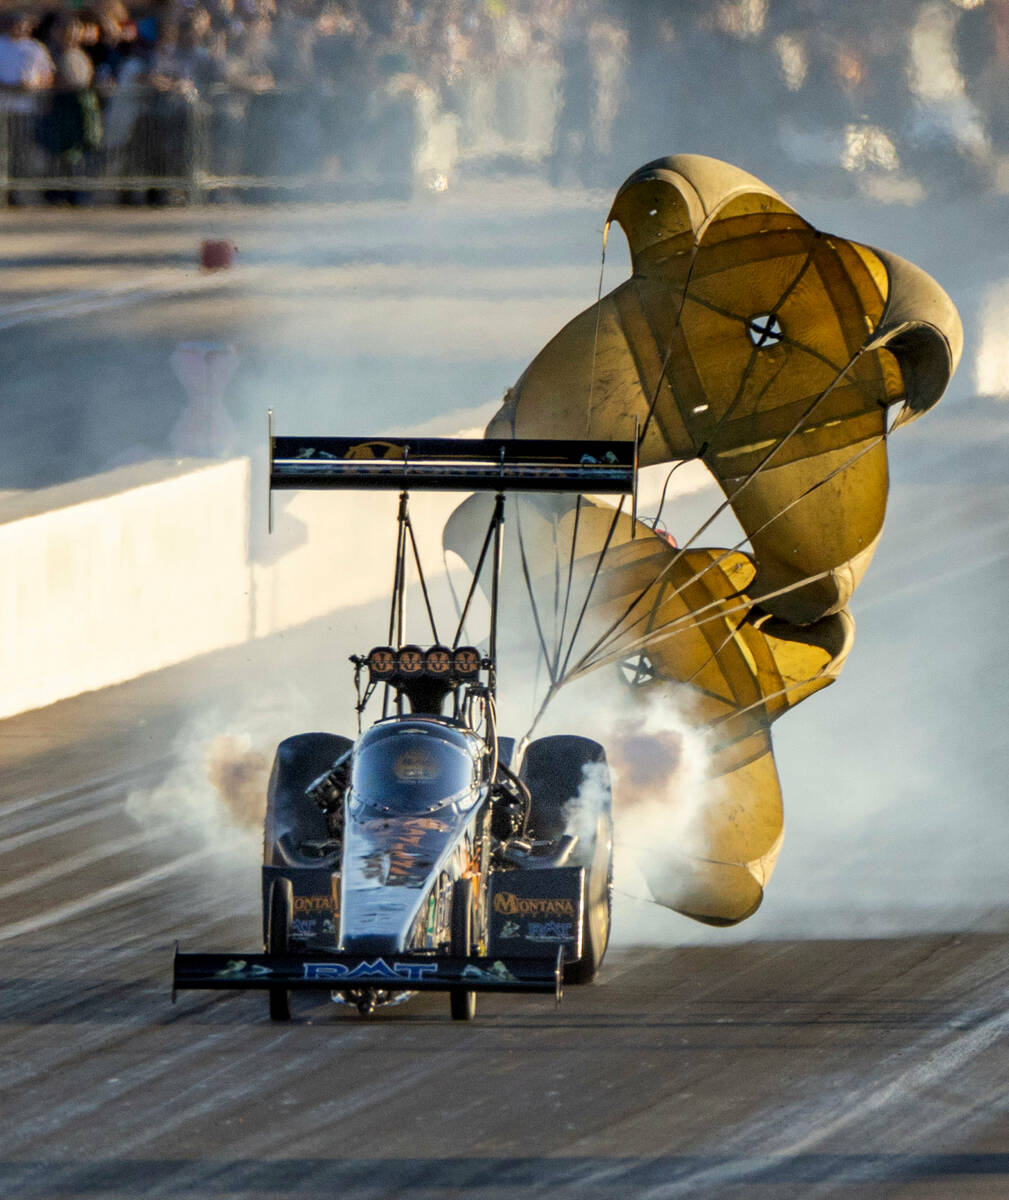 Austin Prock deploys his parachute during a Top Fuel qualifying session in the NHRA Nevada Nati ...